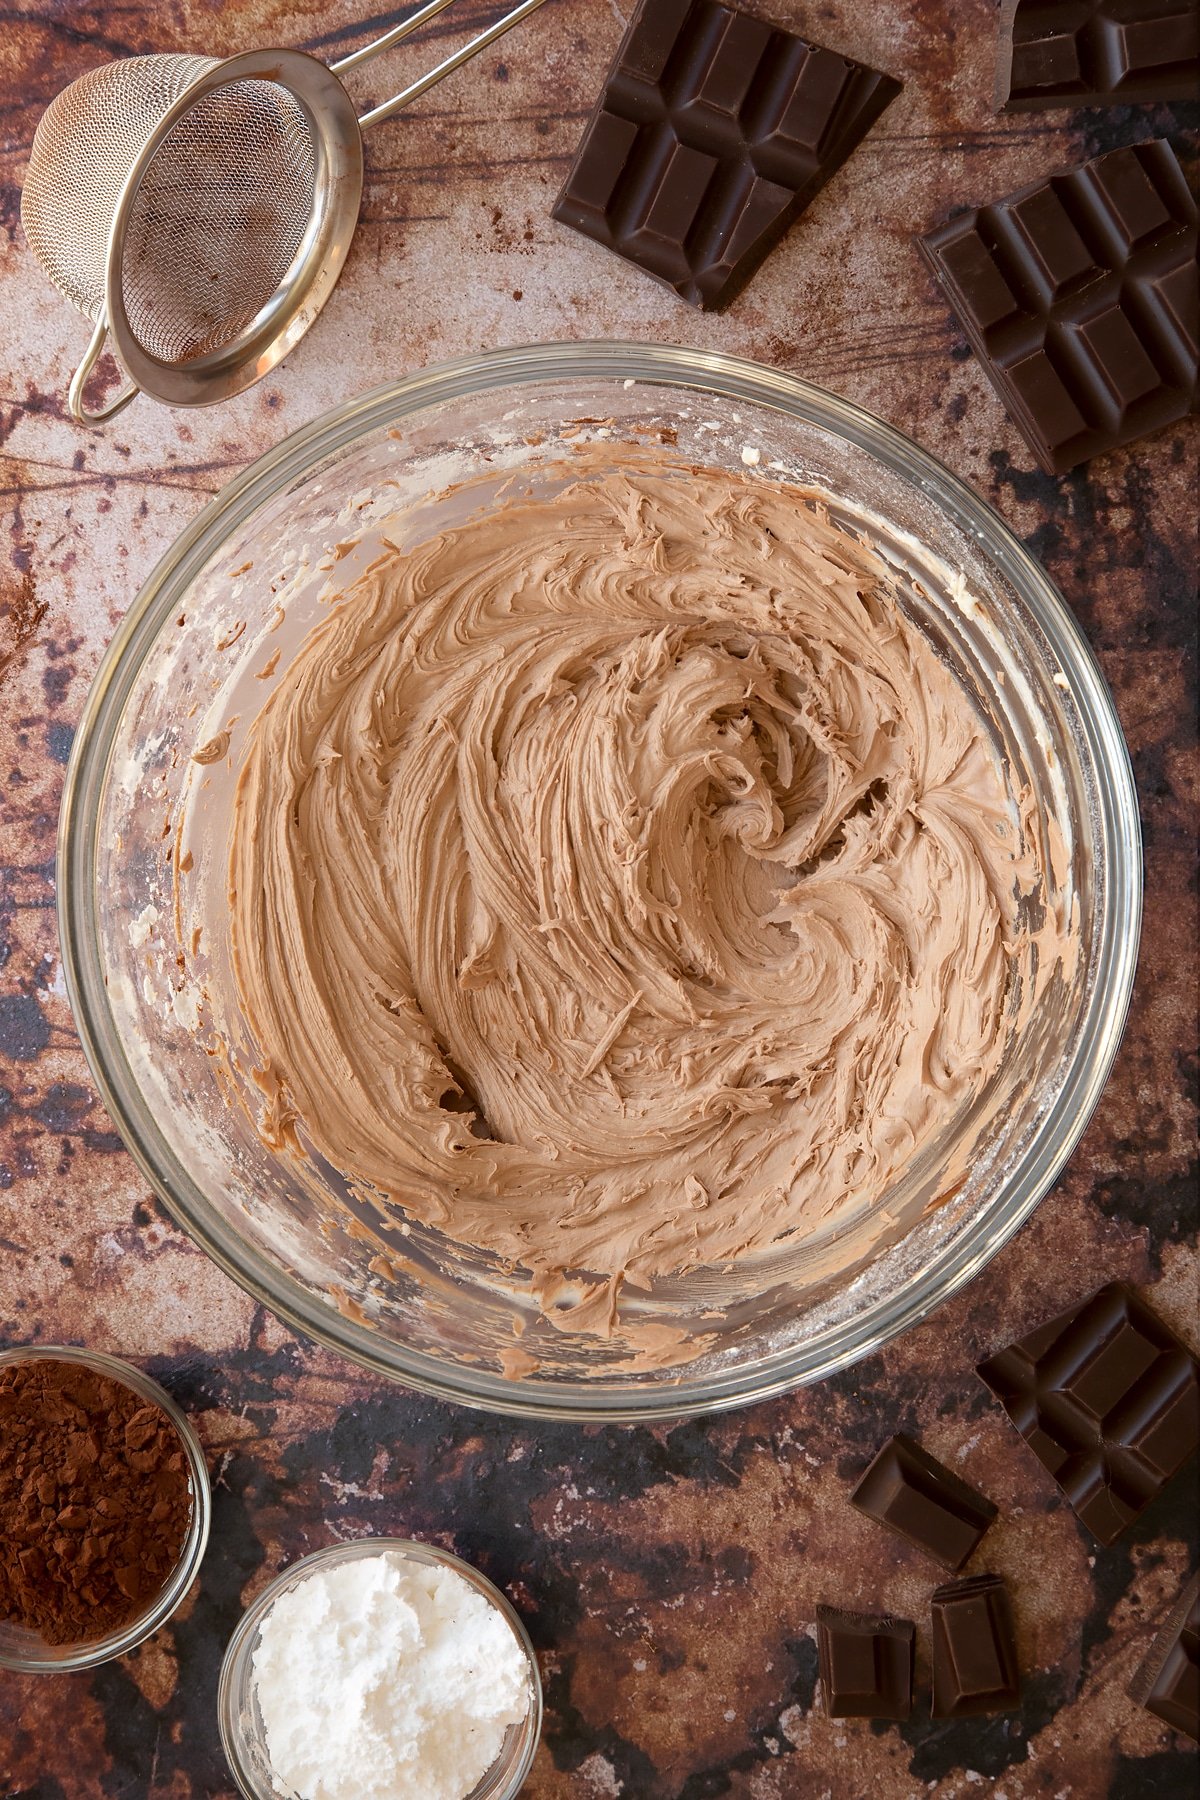 Chocolate buttercream in a bowl. Ingredients to make chocolate Swiss roll surround the bowl.